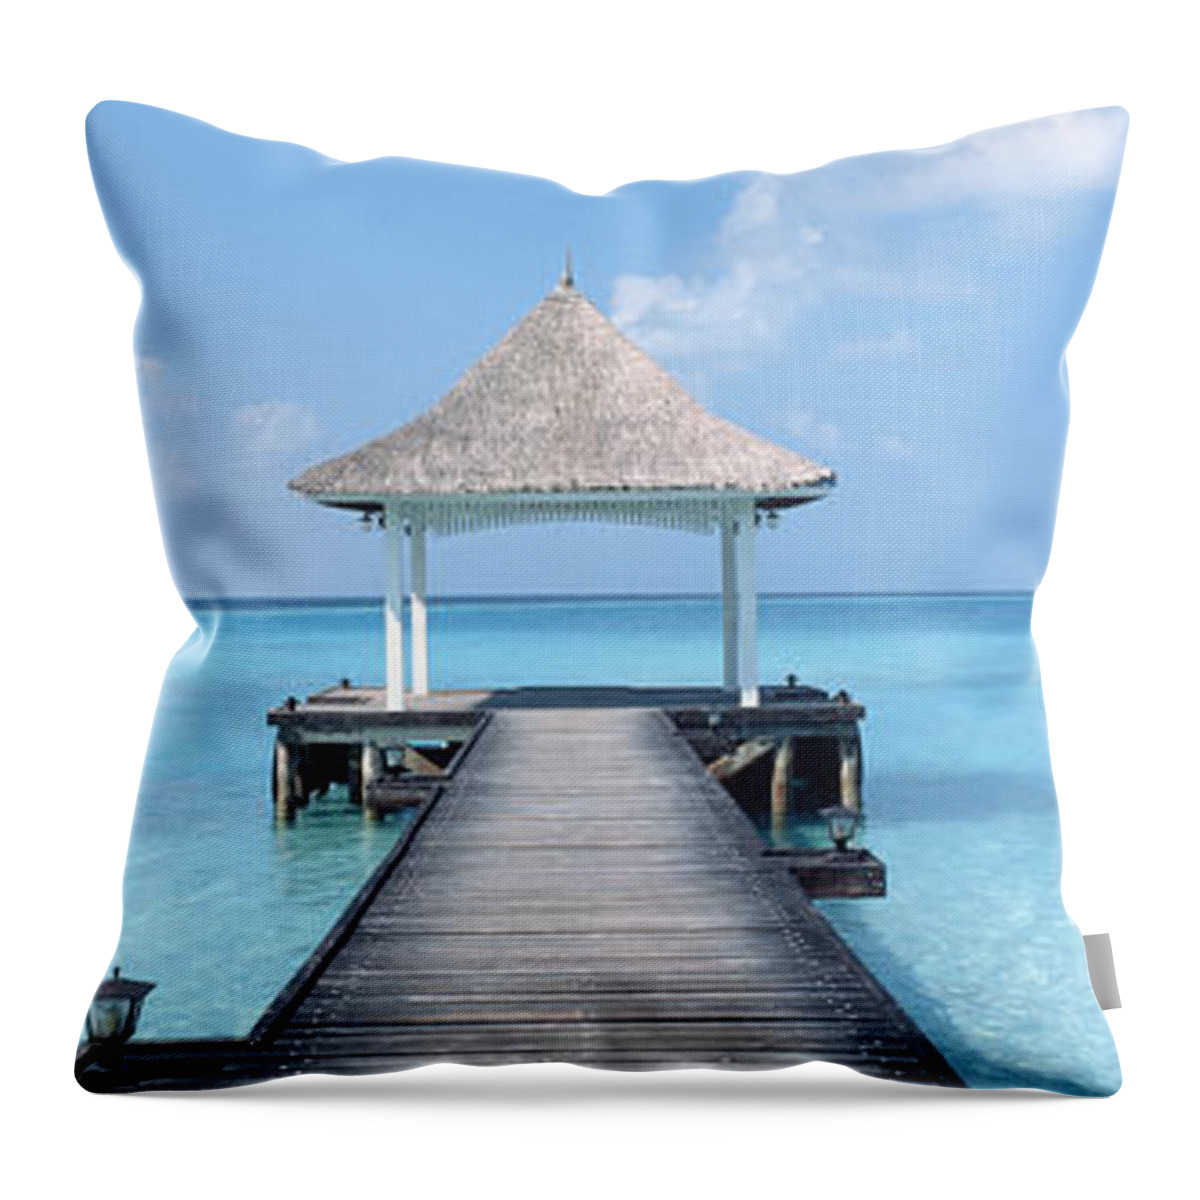 Photography Throw Pillow featuring the photograph Beach & Pier The Maldives by Panoramic Images